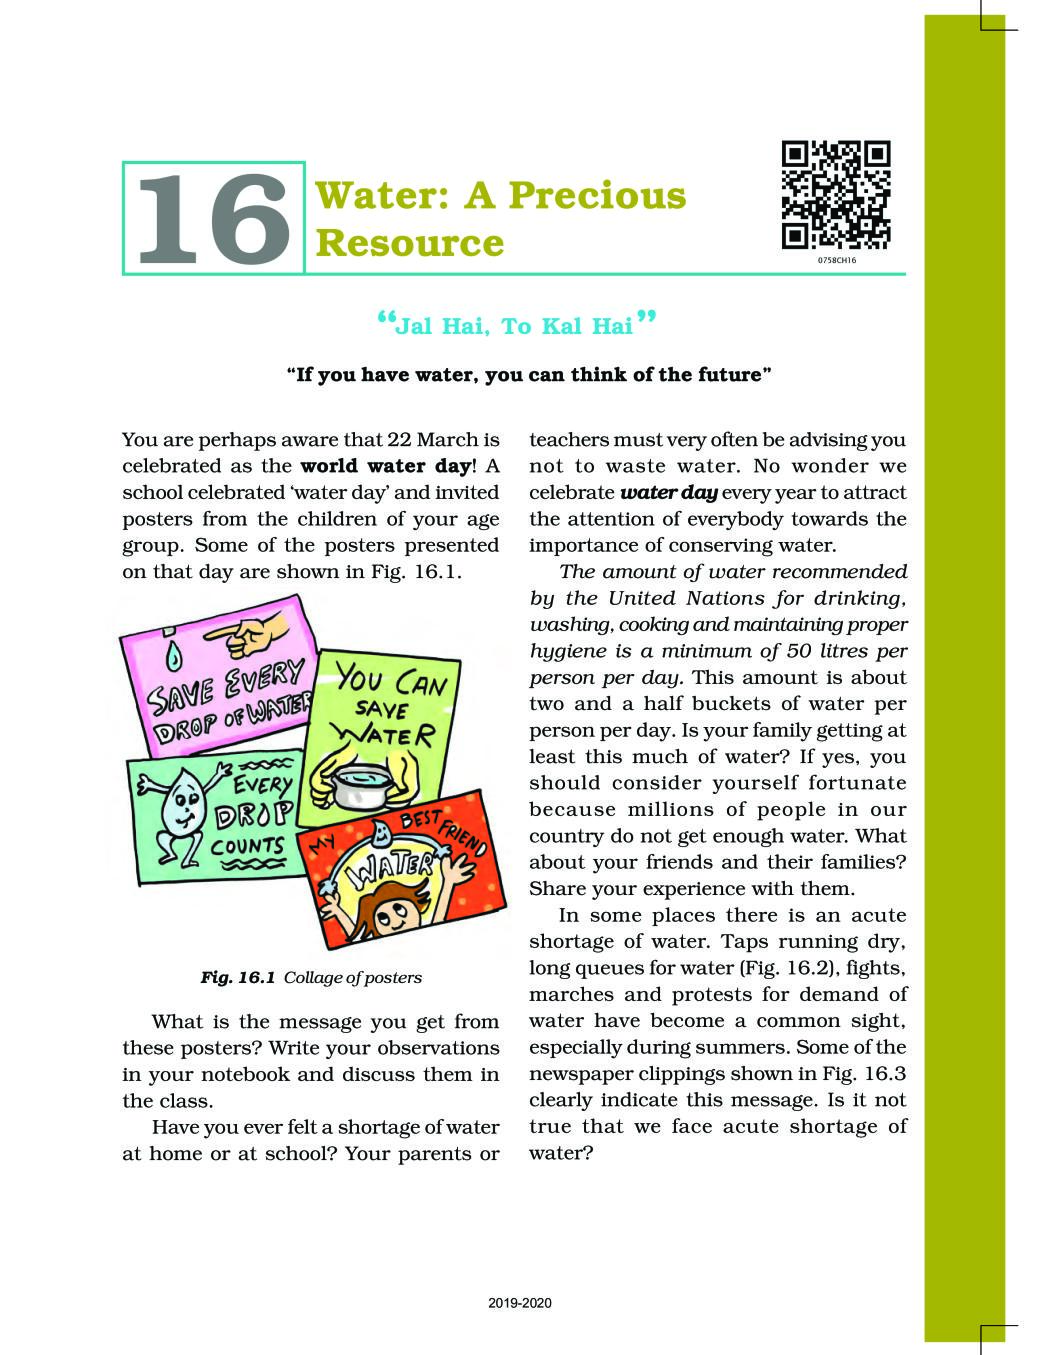 NCERT Book Class 7 Science Chapter 16 Water: A Precious Resource - Page 1